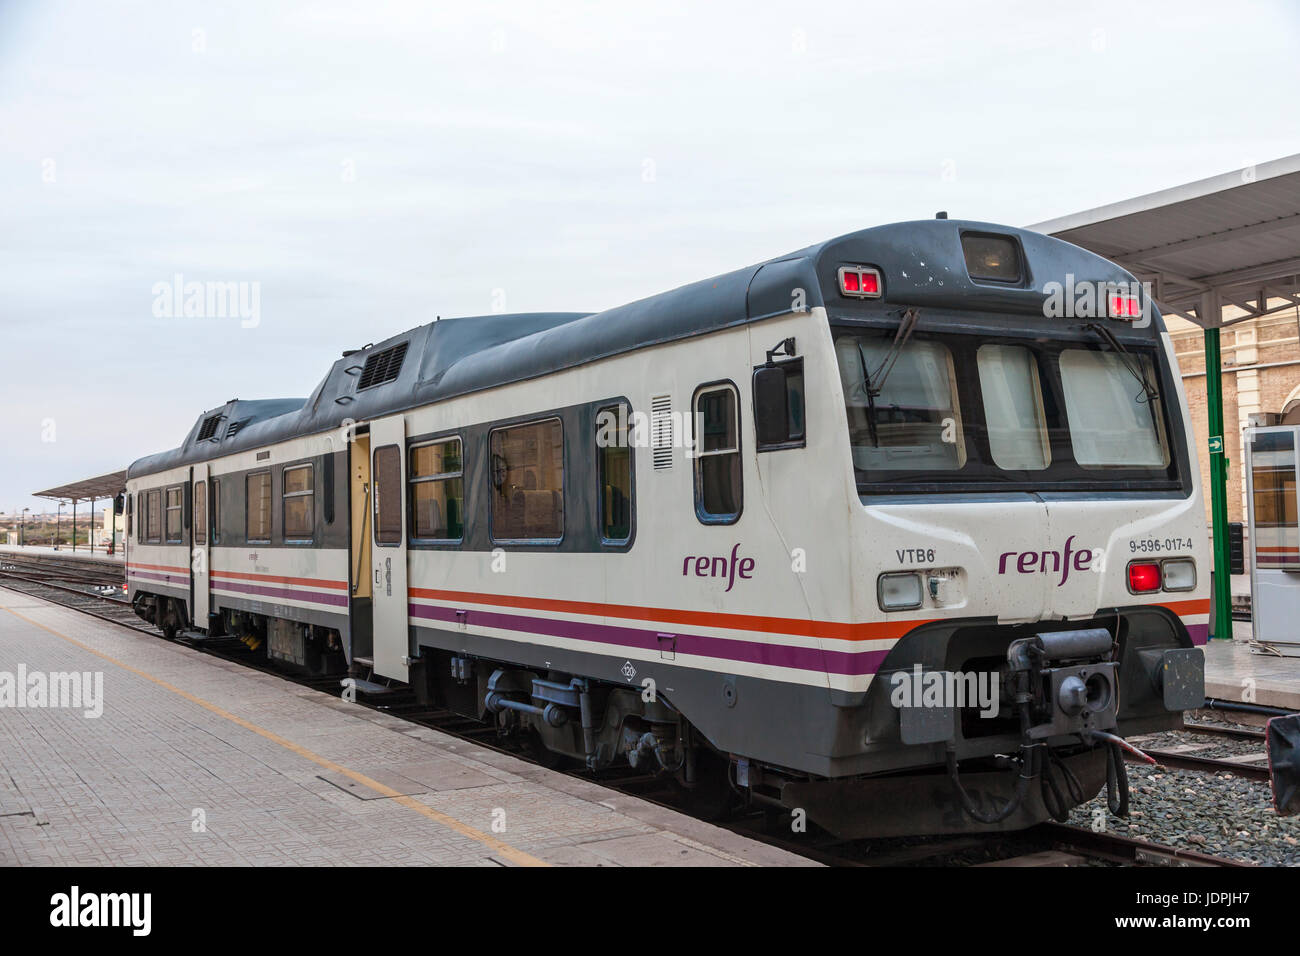 Cartagena, Spain - May 17, 2017: Passenger train at the central station in Cartagena, region of Murcia, Spain Stock Photo